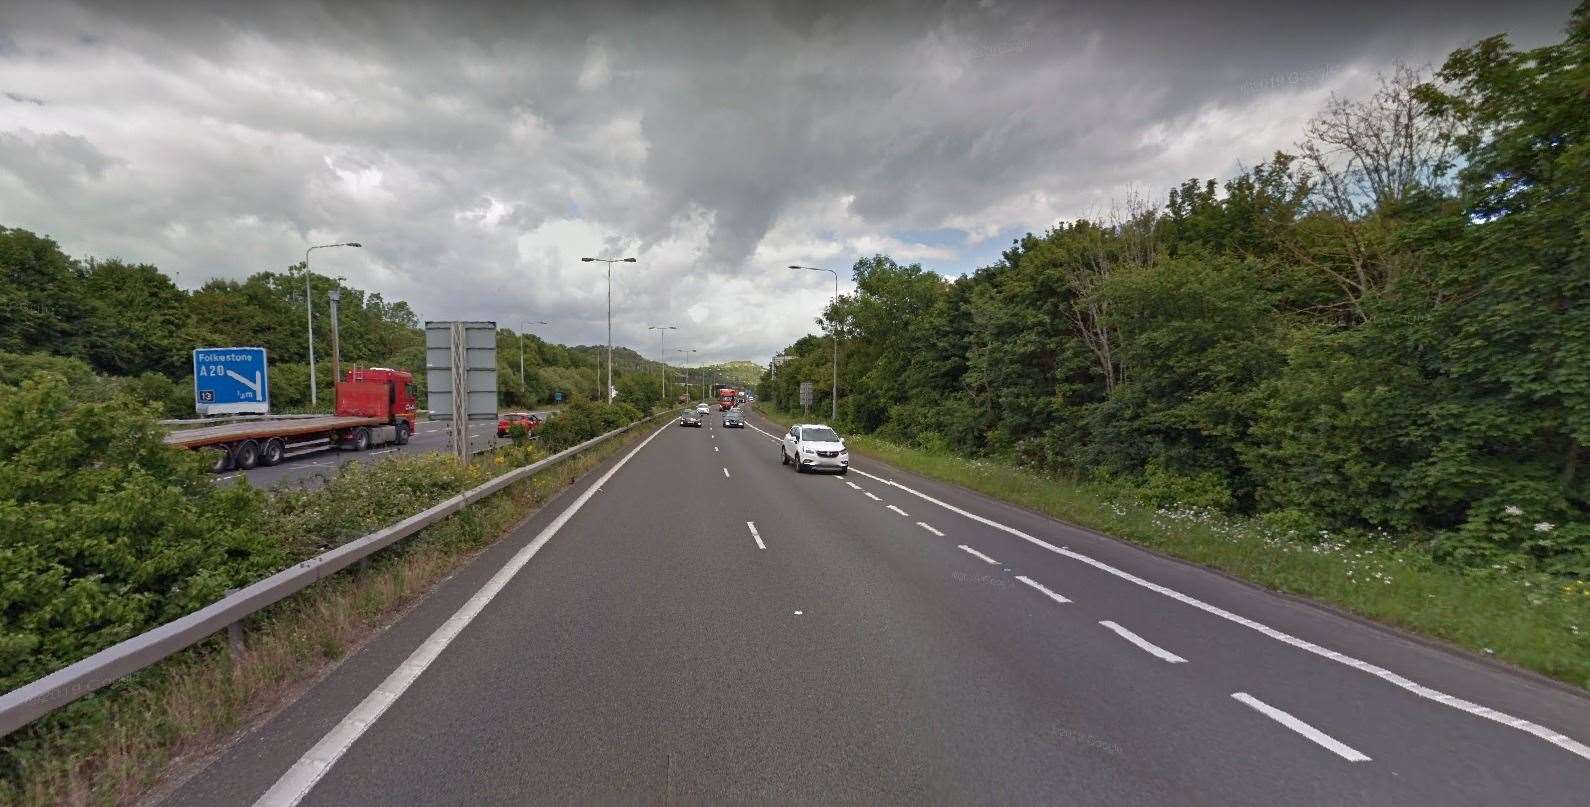 The incident took place along the coast-bound carriageway of the M20. Picture: Google